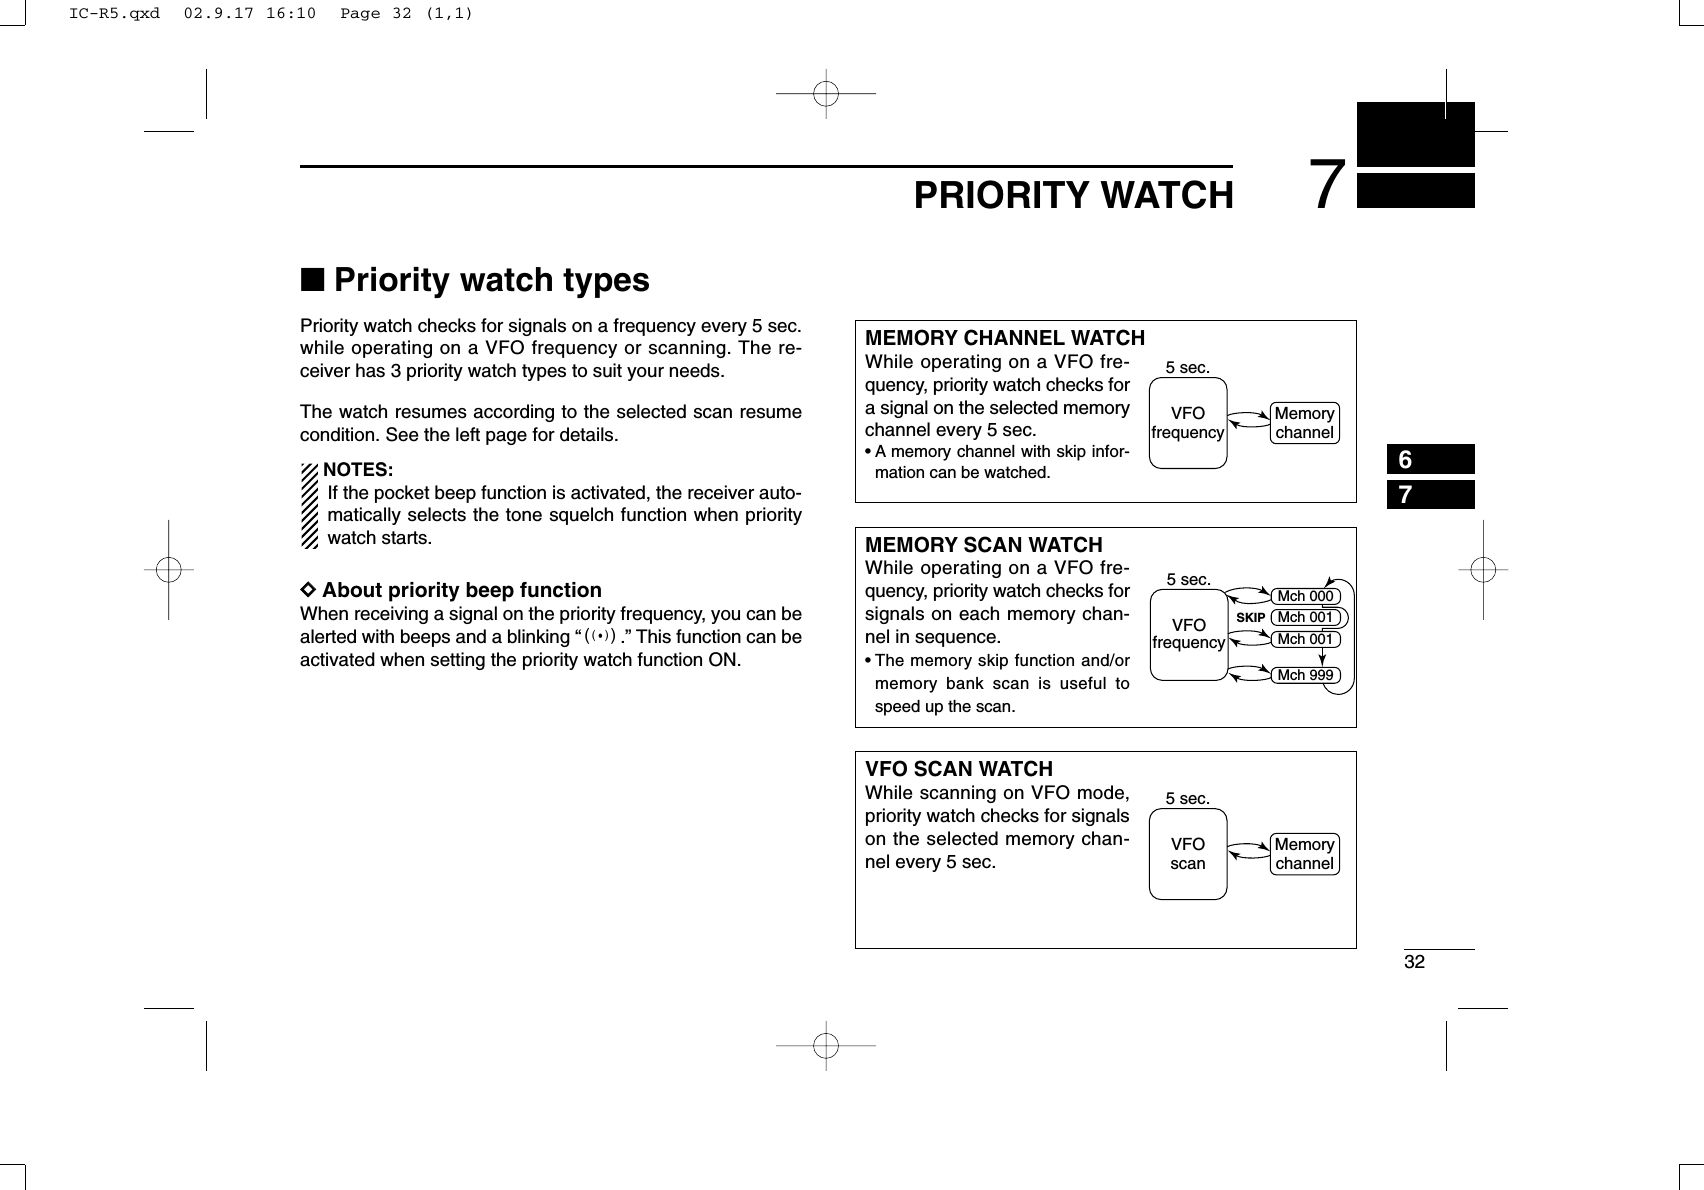 327PRIORITY WATCH67■Priority watch typesPriority watch checks for signals on a frequency every 5 sec.while operating on a VFO frequency or scanning. The re-ceiver has 3 priority watch types to suit your needs. The watch resumes according to the selected scan resumecondition. See the left page for details.NOTES:If the pocket beep function is activated, the receiver auto-matically selects the tone squelch function when prioritywatch starts.DDAbout priority beep functionWhen receiving a signal on the priority frequency, you can bealerted with beeps and a blinking “S.” This function can beactivated when setting the priority watch function ON.MEMORY CHANNEL WATCHWhile operating on a VFO fre-quency, priority watch checks fora signal on the selected memorychannel every 5 sec.•A memory channel with skip infor-mation can be watched.MEMORY SCAN WATCHWhile operating on a VFO fre-quency, priority watch checks forsignals on each memory chan-nel in sequence.•The memory skip function and/ormemory bank scan is useful tospeed up the scan.5 sec.VFOfrequencyMemorychannel5 sec.VFOfrequencySKIPMch 000Mch 001Mch 001Mch 999VFO SCAN WATCHWhile scanning on VFO mode,priority watch checks for signalson the selected memory chan-nel every 5 sec.5 sec.VFOscanMemorychannelIC-R5.qxd  02.9.17 16:10  Page 32 (1,1)